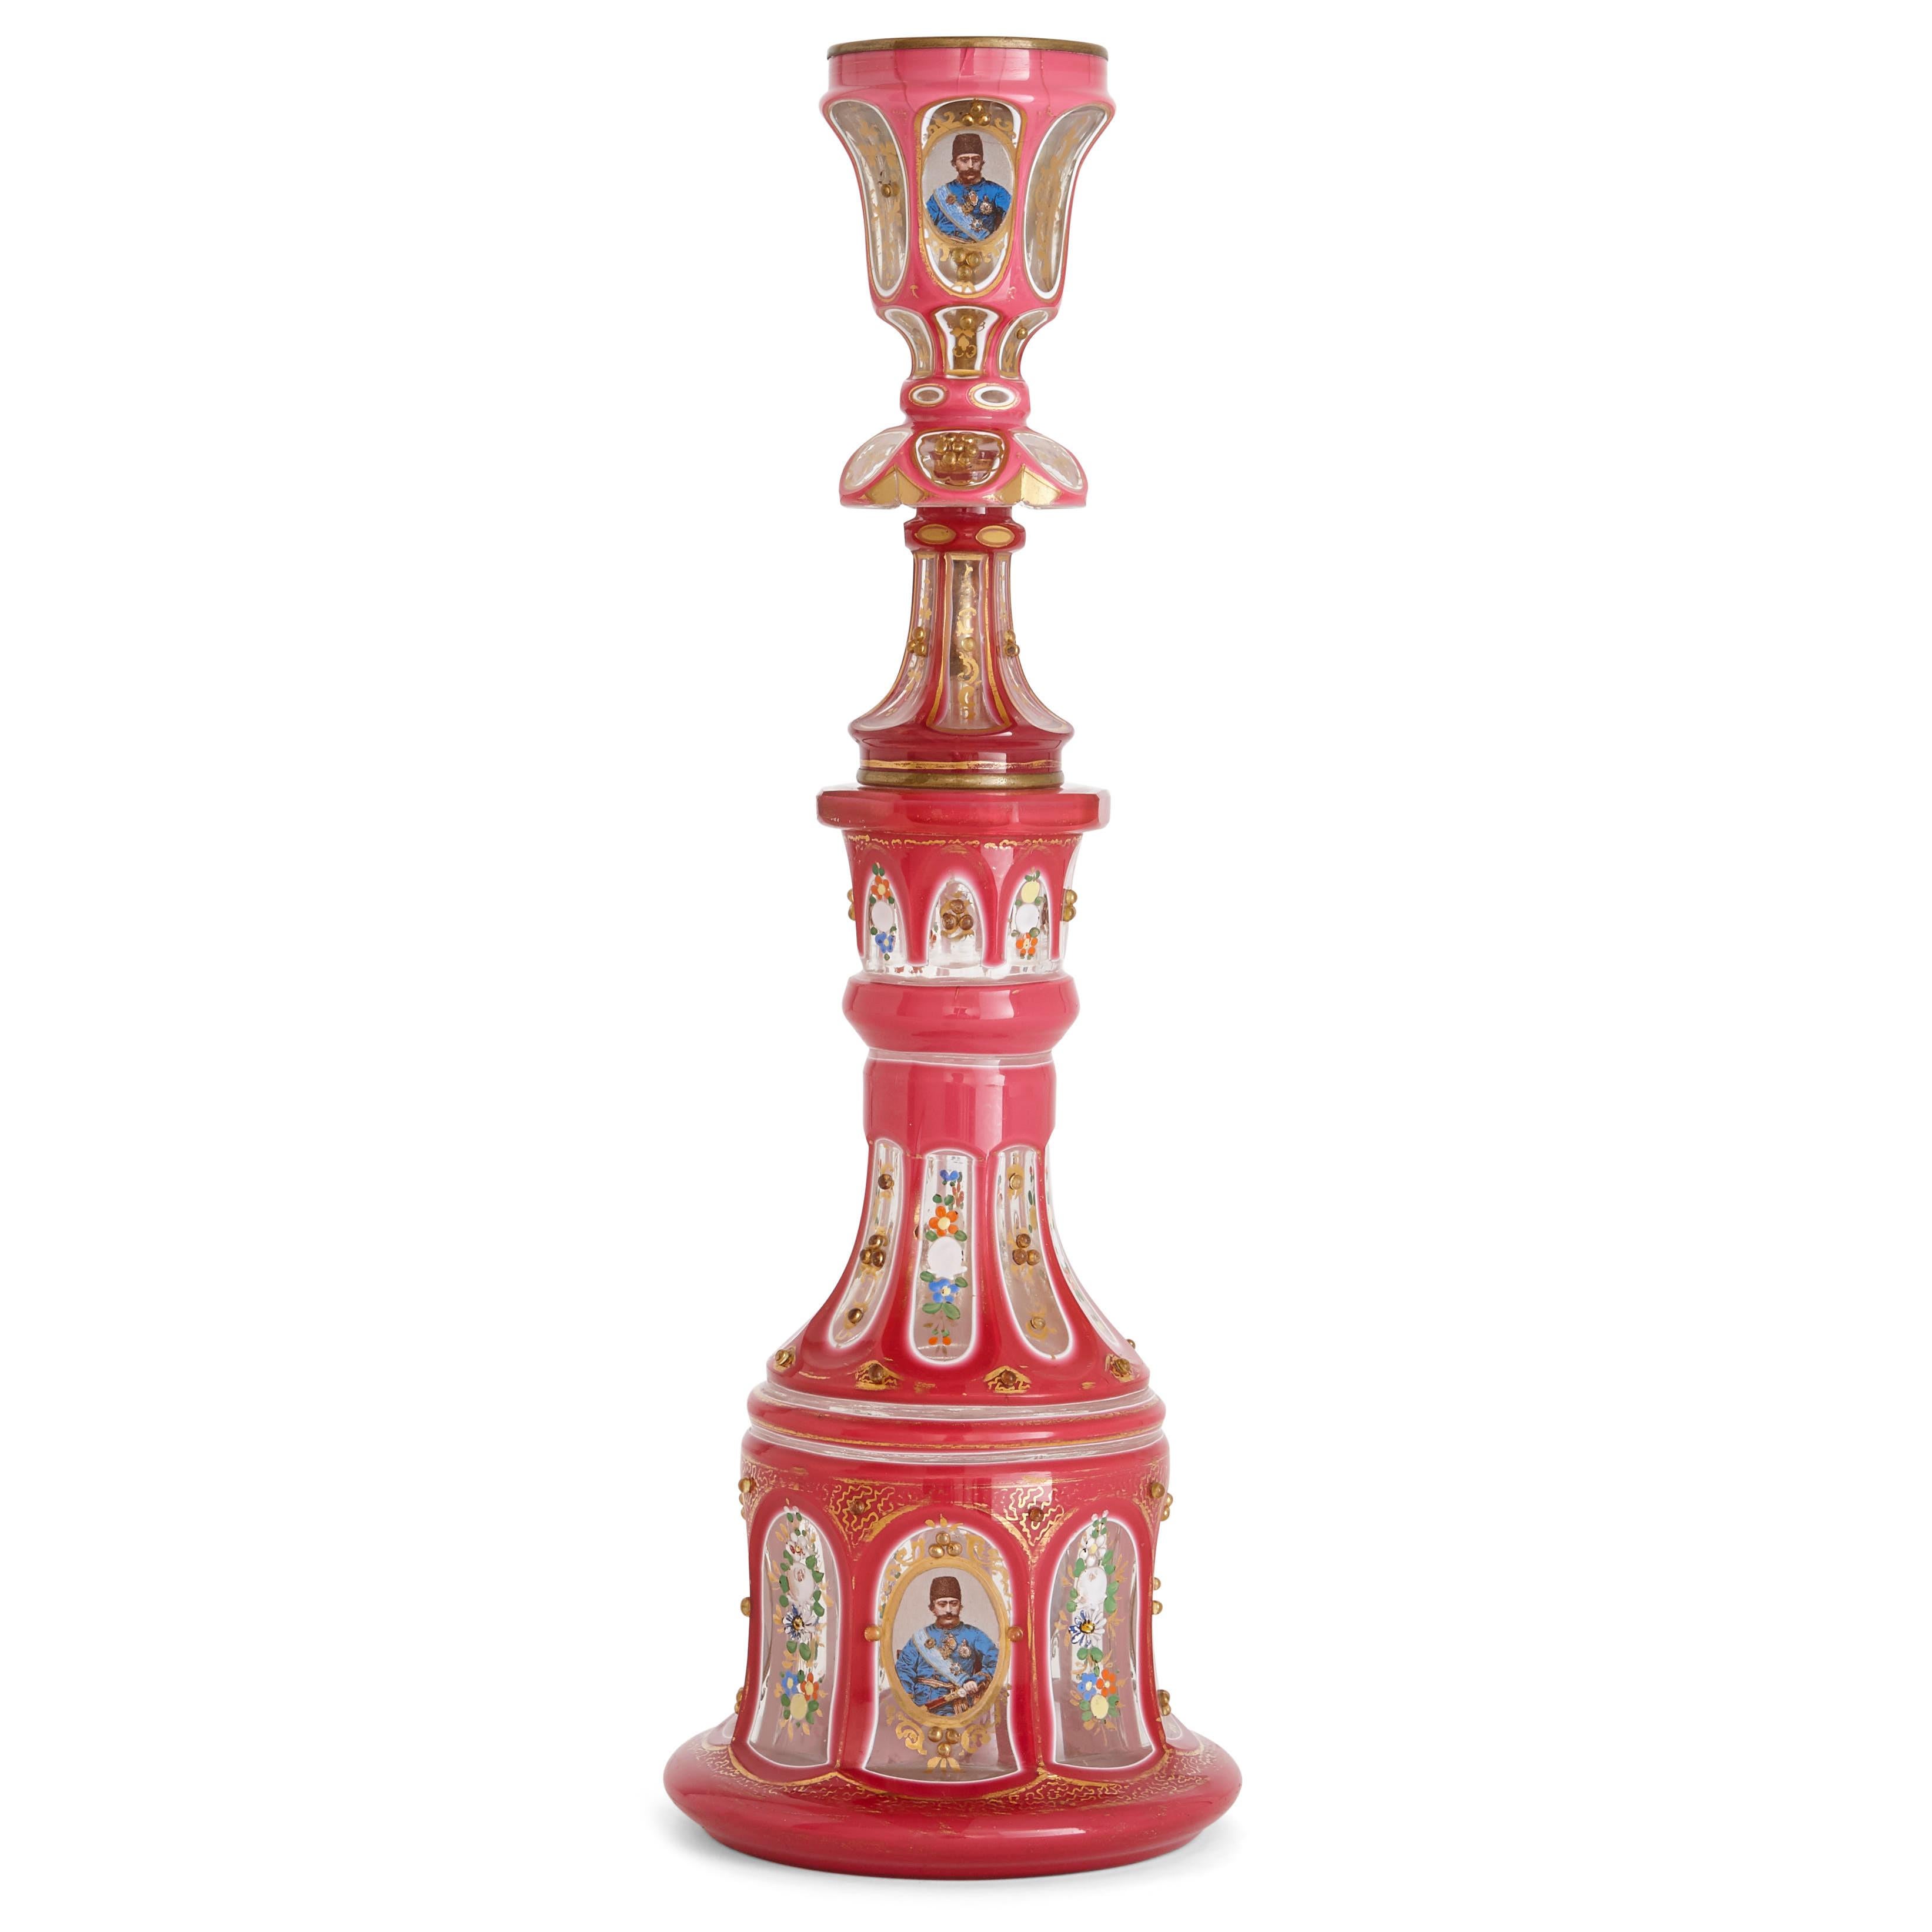 This huqqa (or hookah) is a superb example of the beauty and high quality craftsmanship of Bohemian glassware. The huqqa is decorated with photo-realistic portraits of the Qajar kings, Naser al-Din Shah (reigned 1848-1896) and Mozaffar al-Din Shah